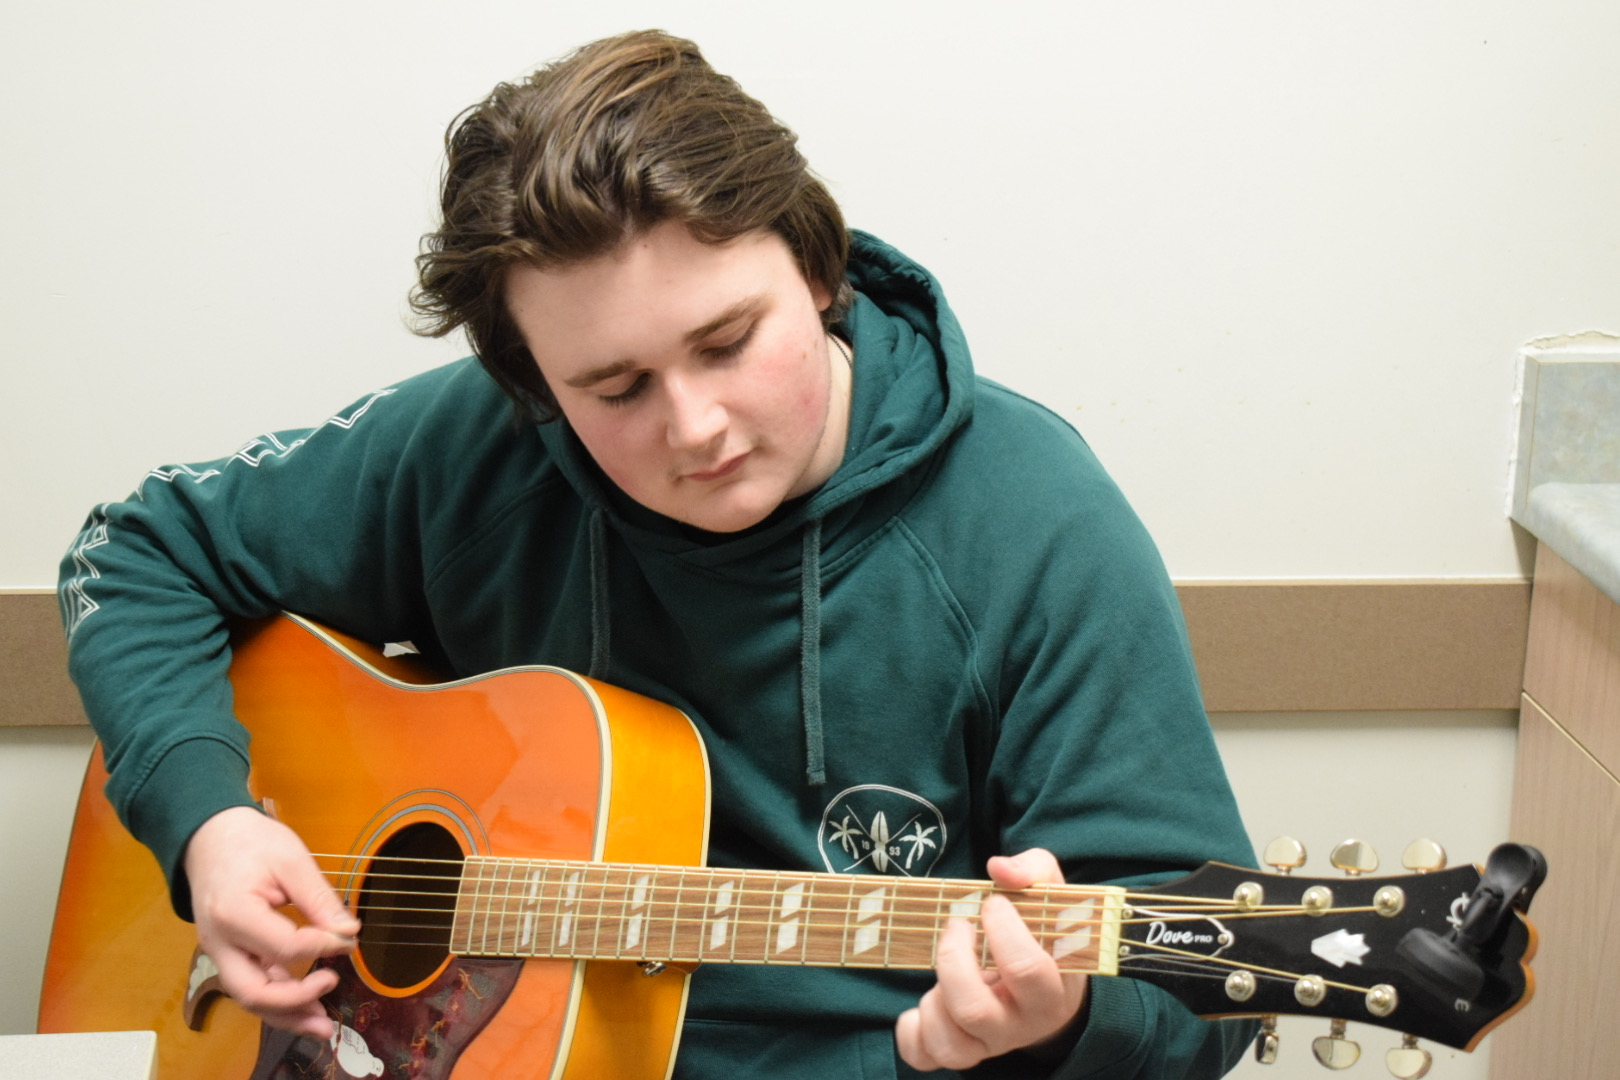 Aidan Elliot-Perreault, a music industry arts student, plays guitar in his residence room.